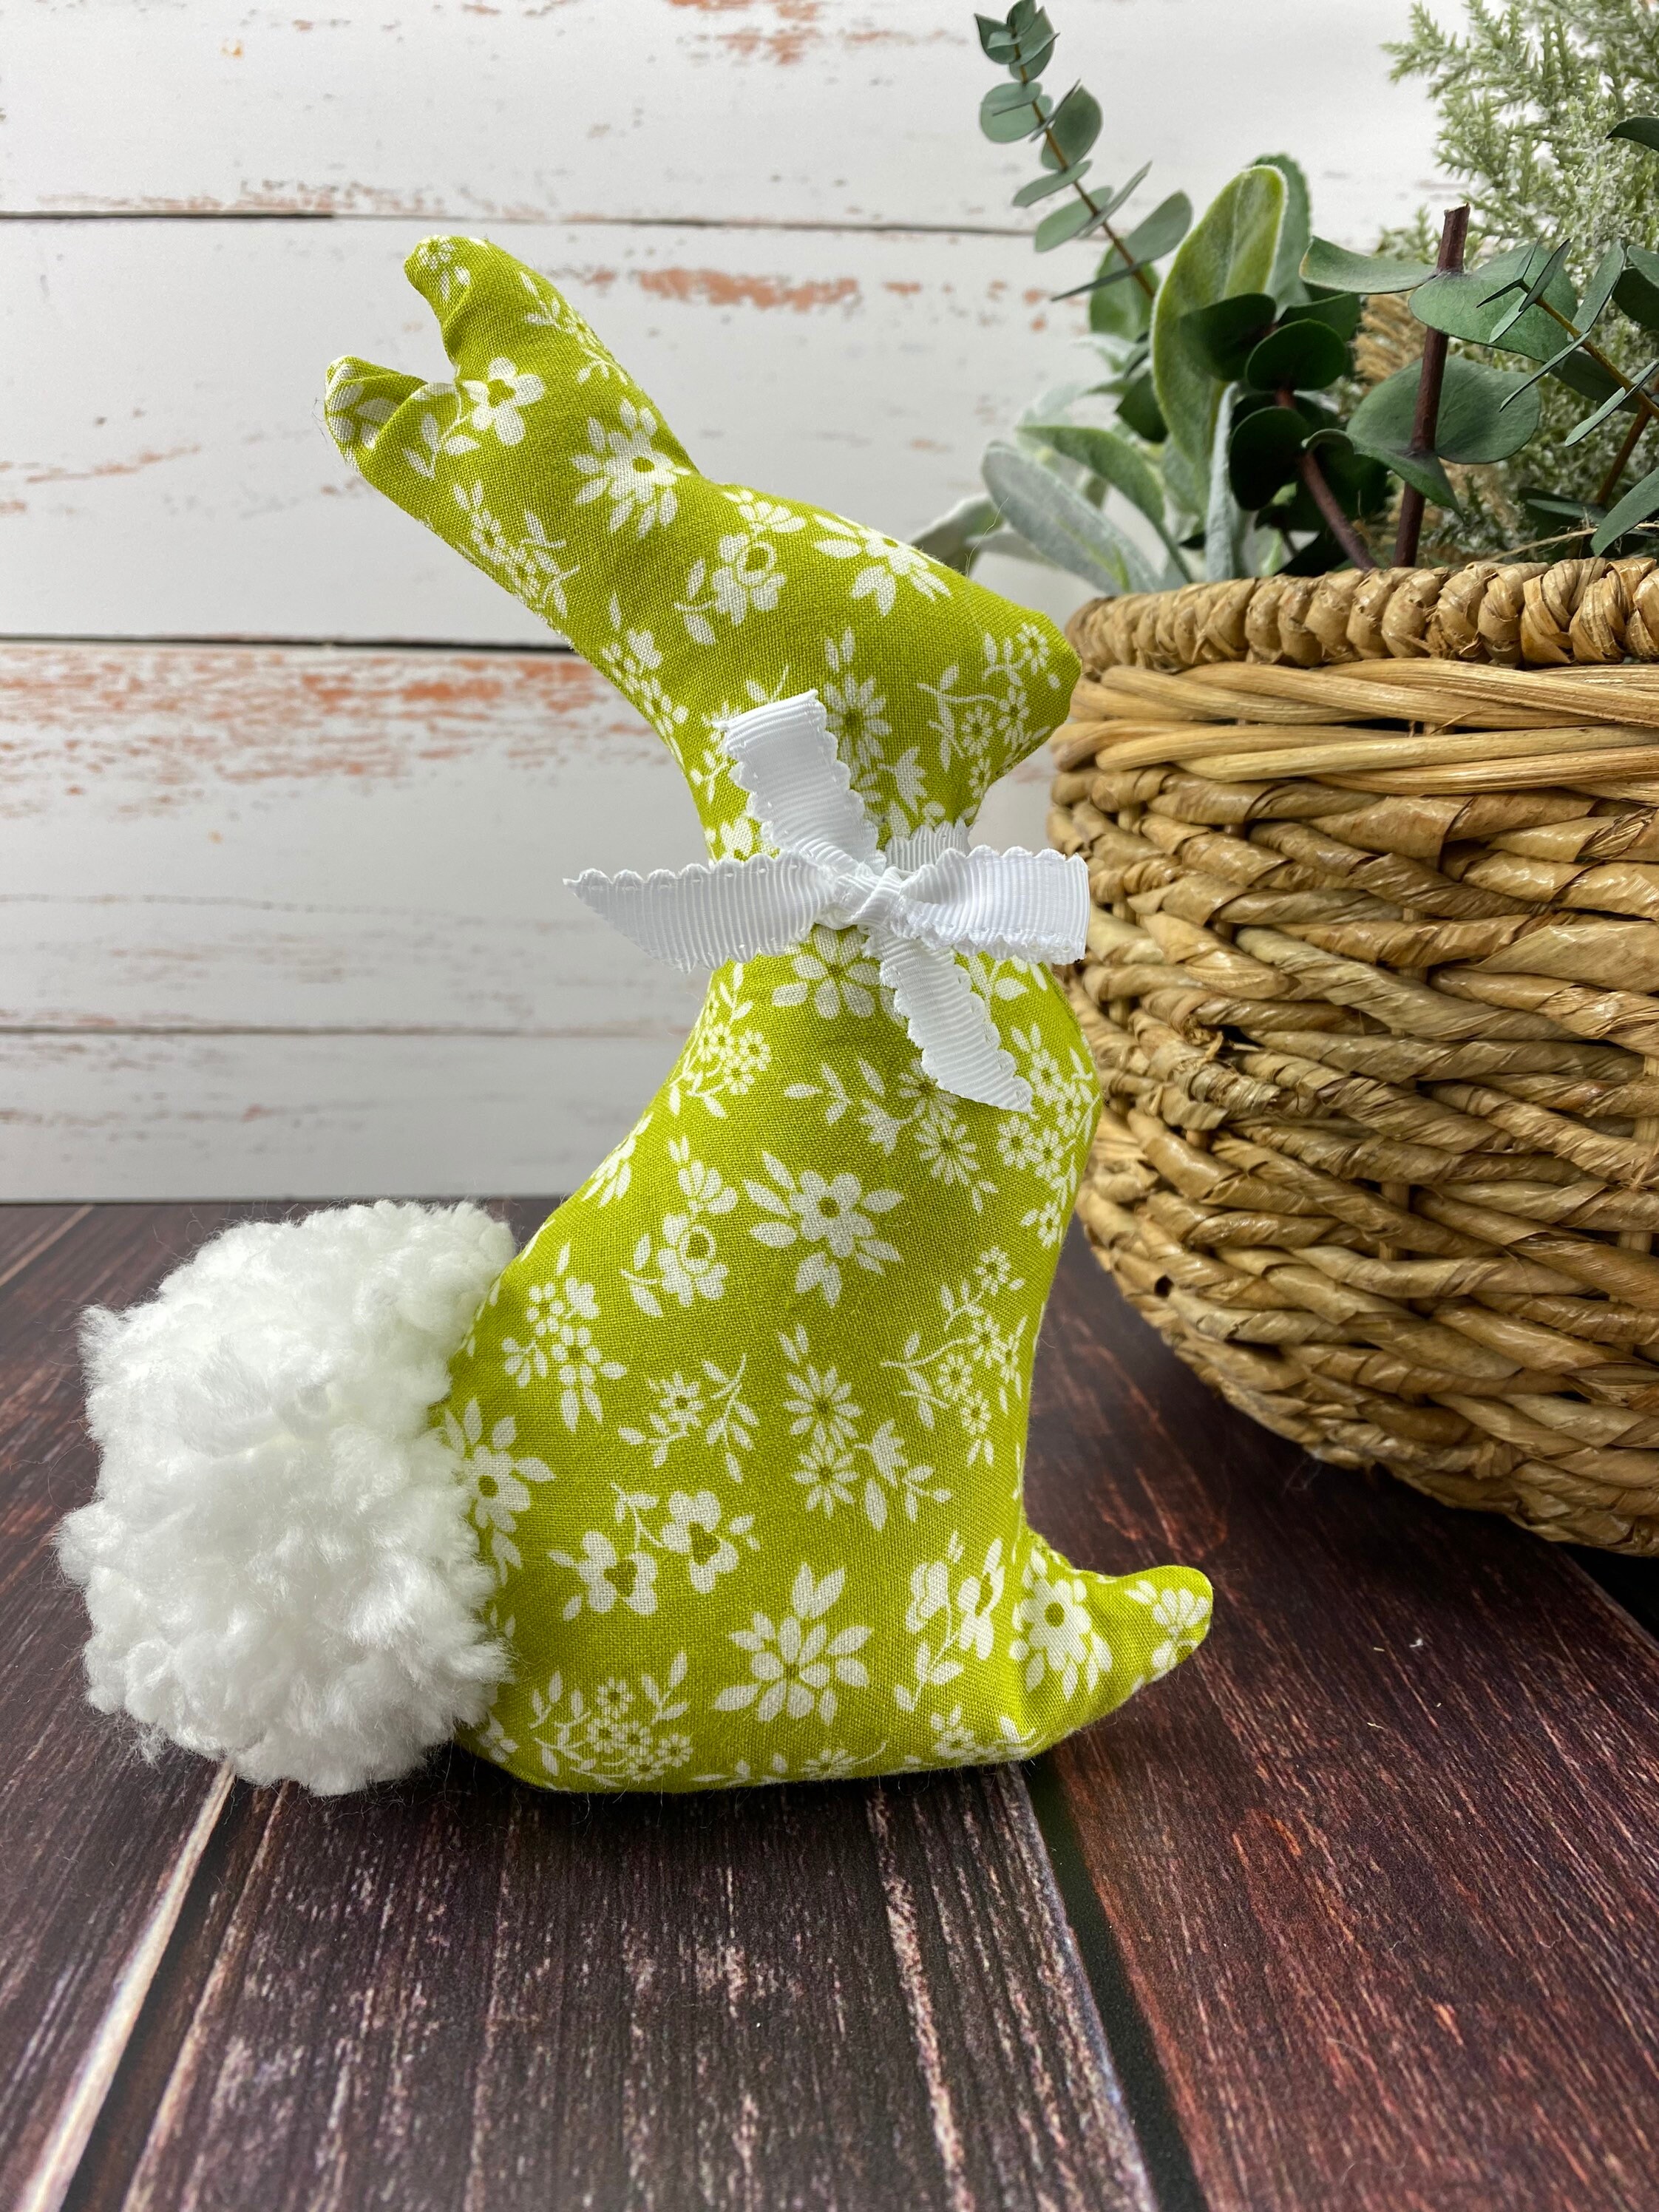 Fabric Stuffed Bunny / Green White Floral Rabbit / Tiered Tray - Etsy